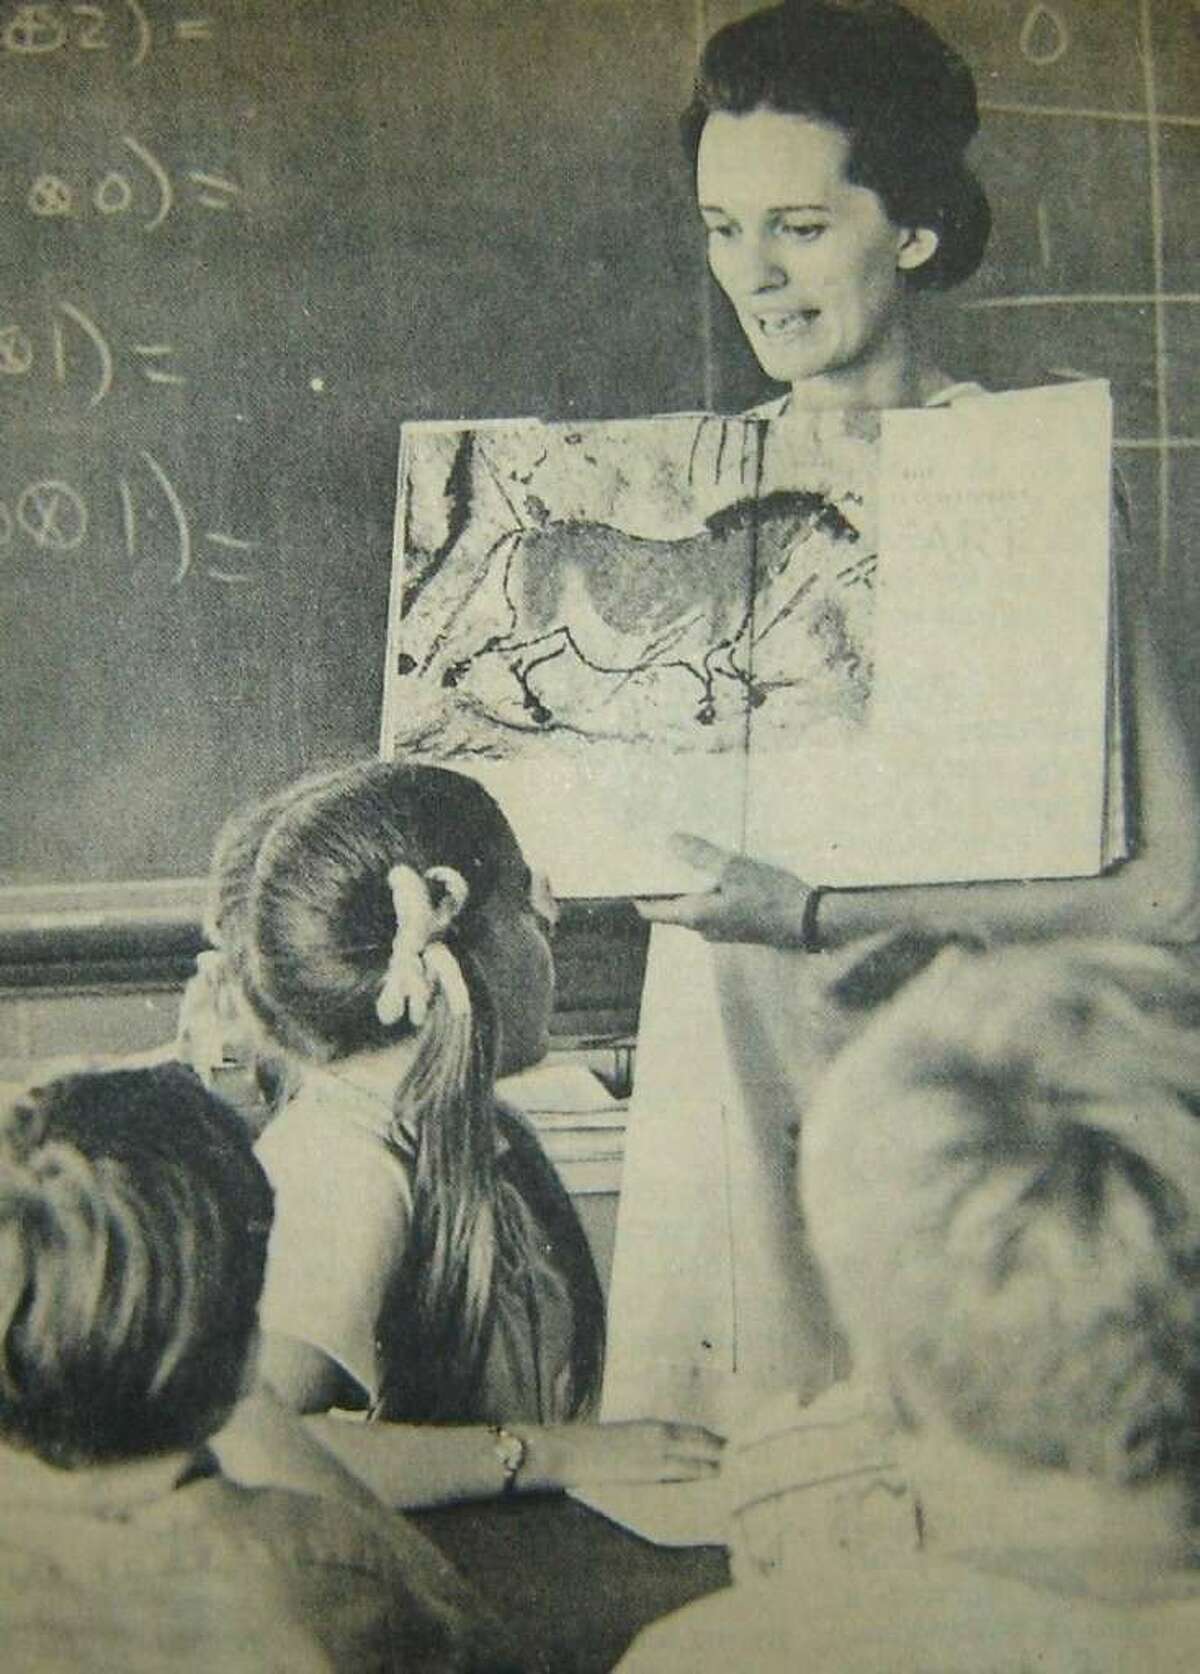 Judy Robert, one of the "picture" ladies who taught art history. Photo from the 1972 Conroe Service League scrapbook.